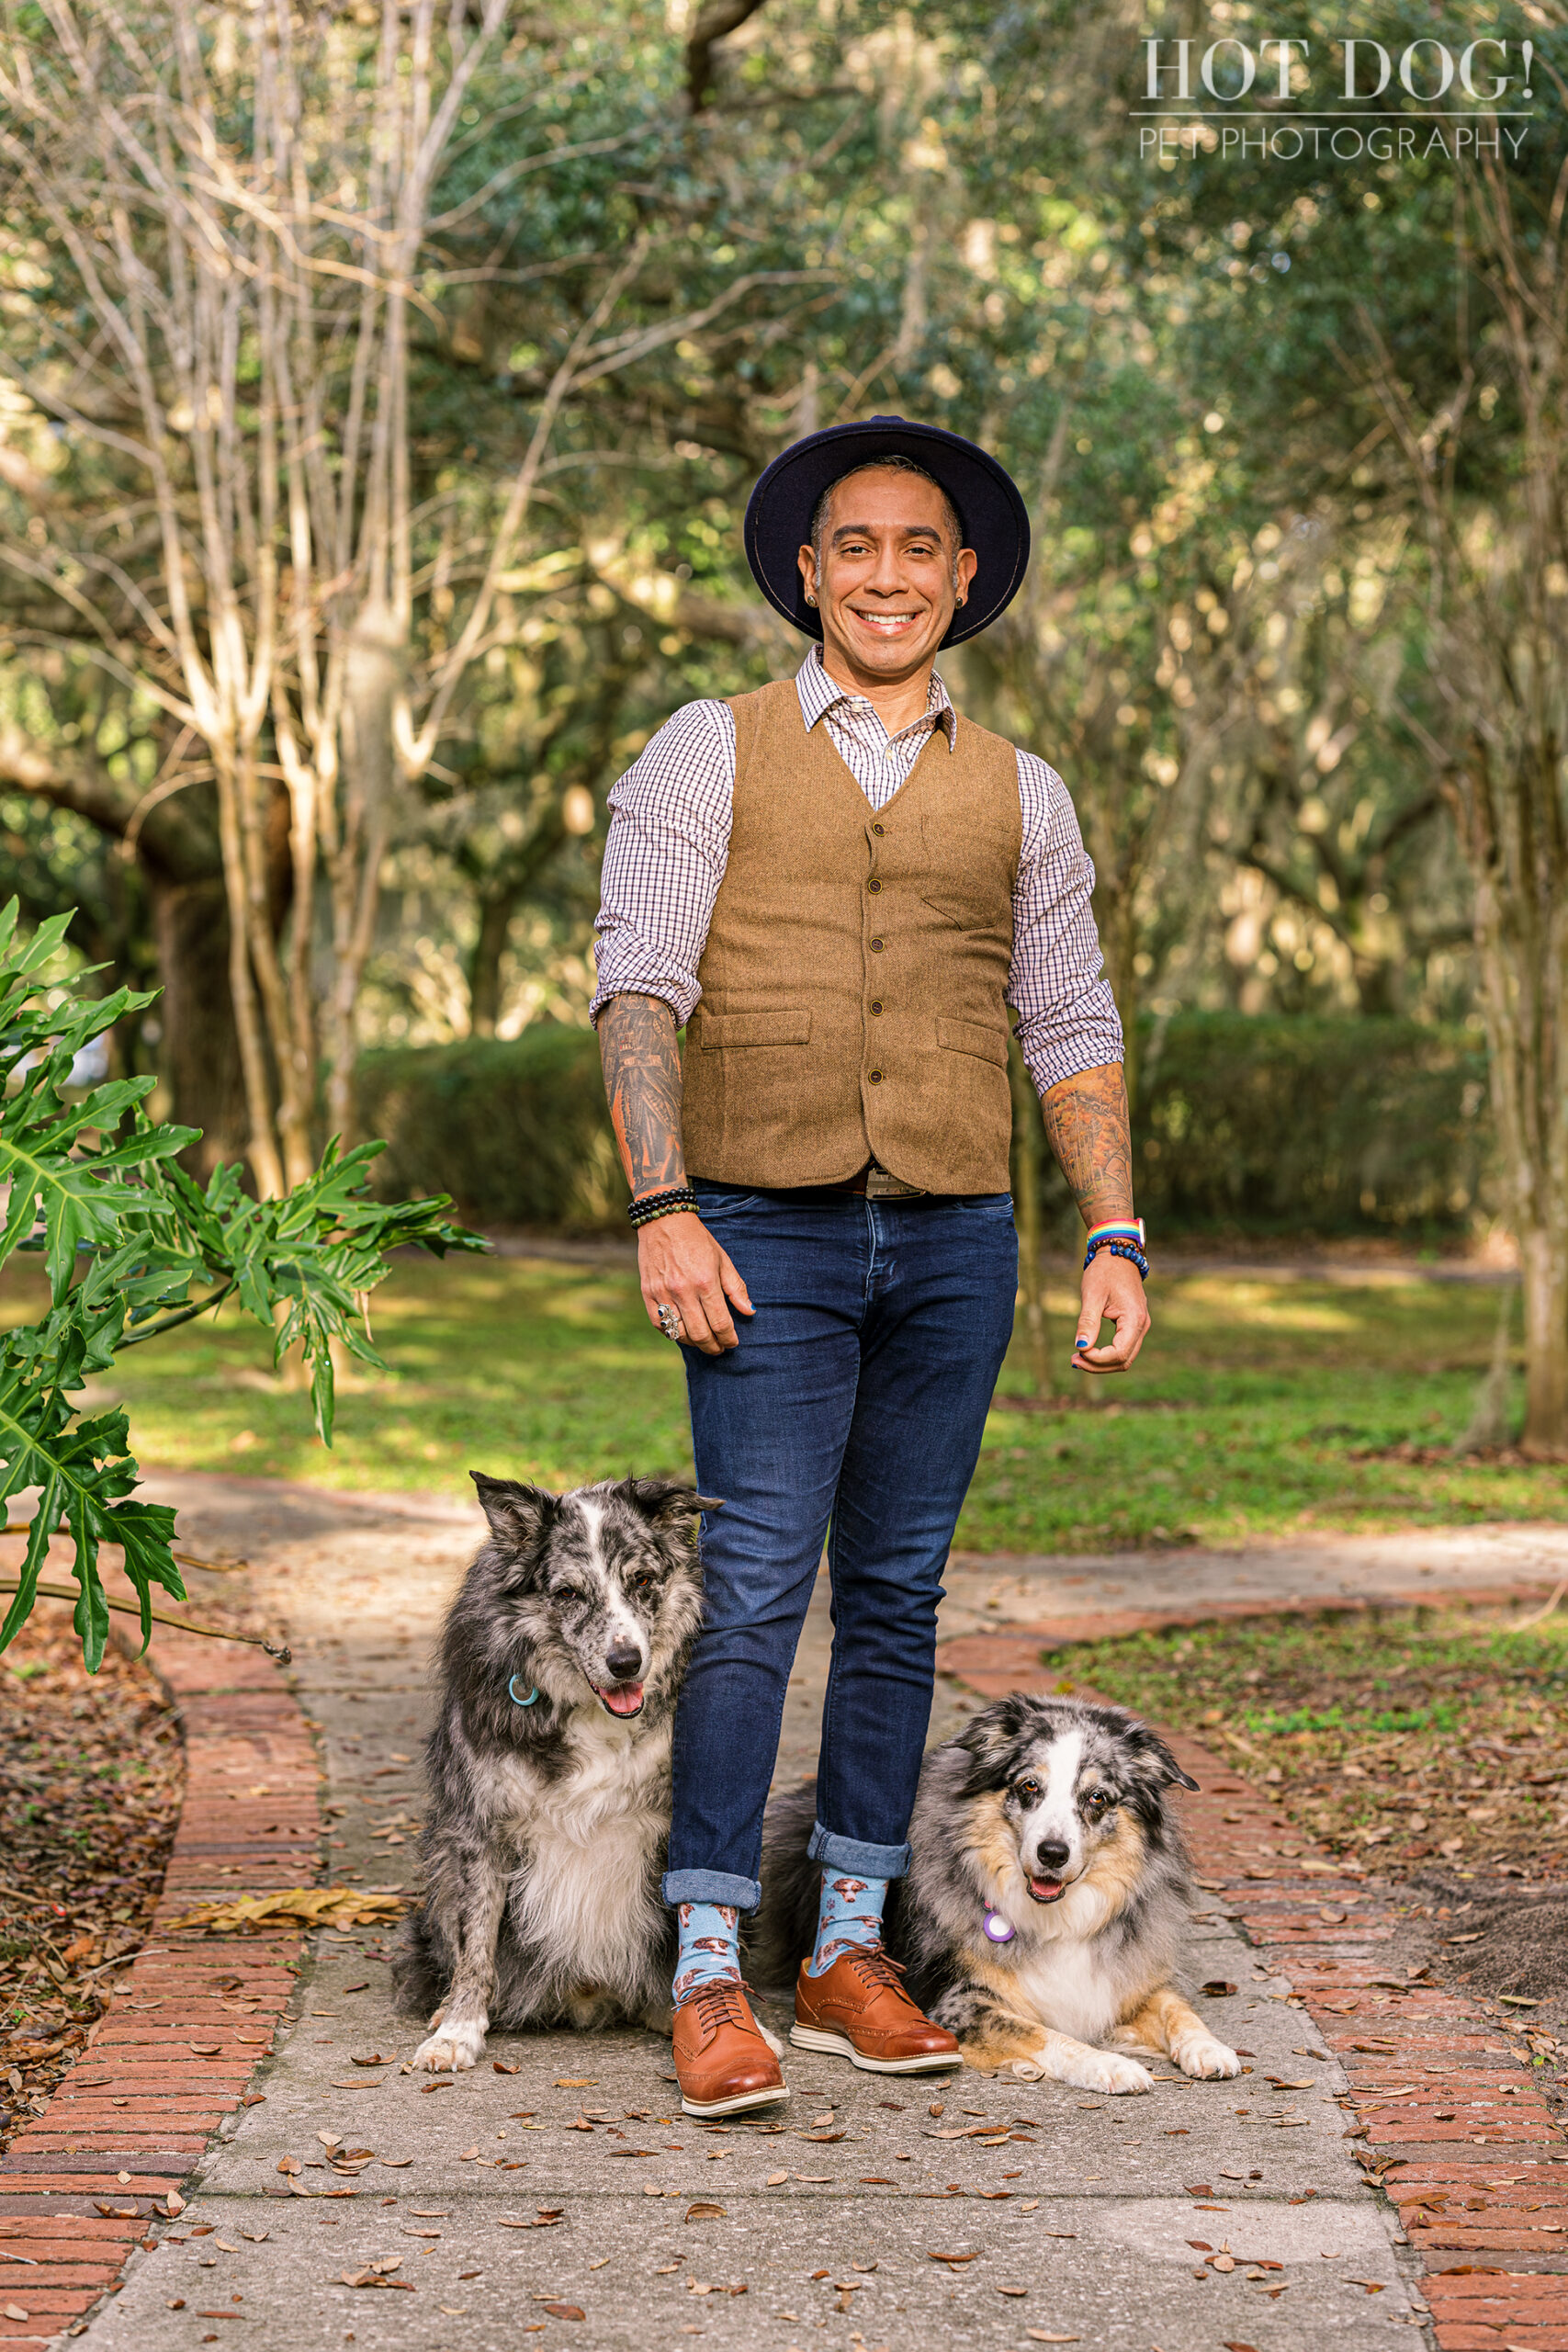 Andres and his beloved Border Collies, Allie and Flash, sharing a joyful moment.